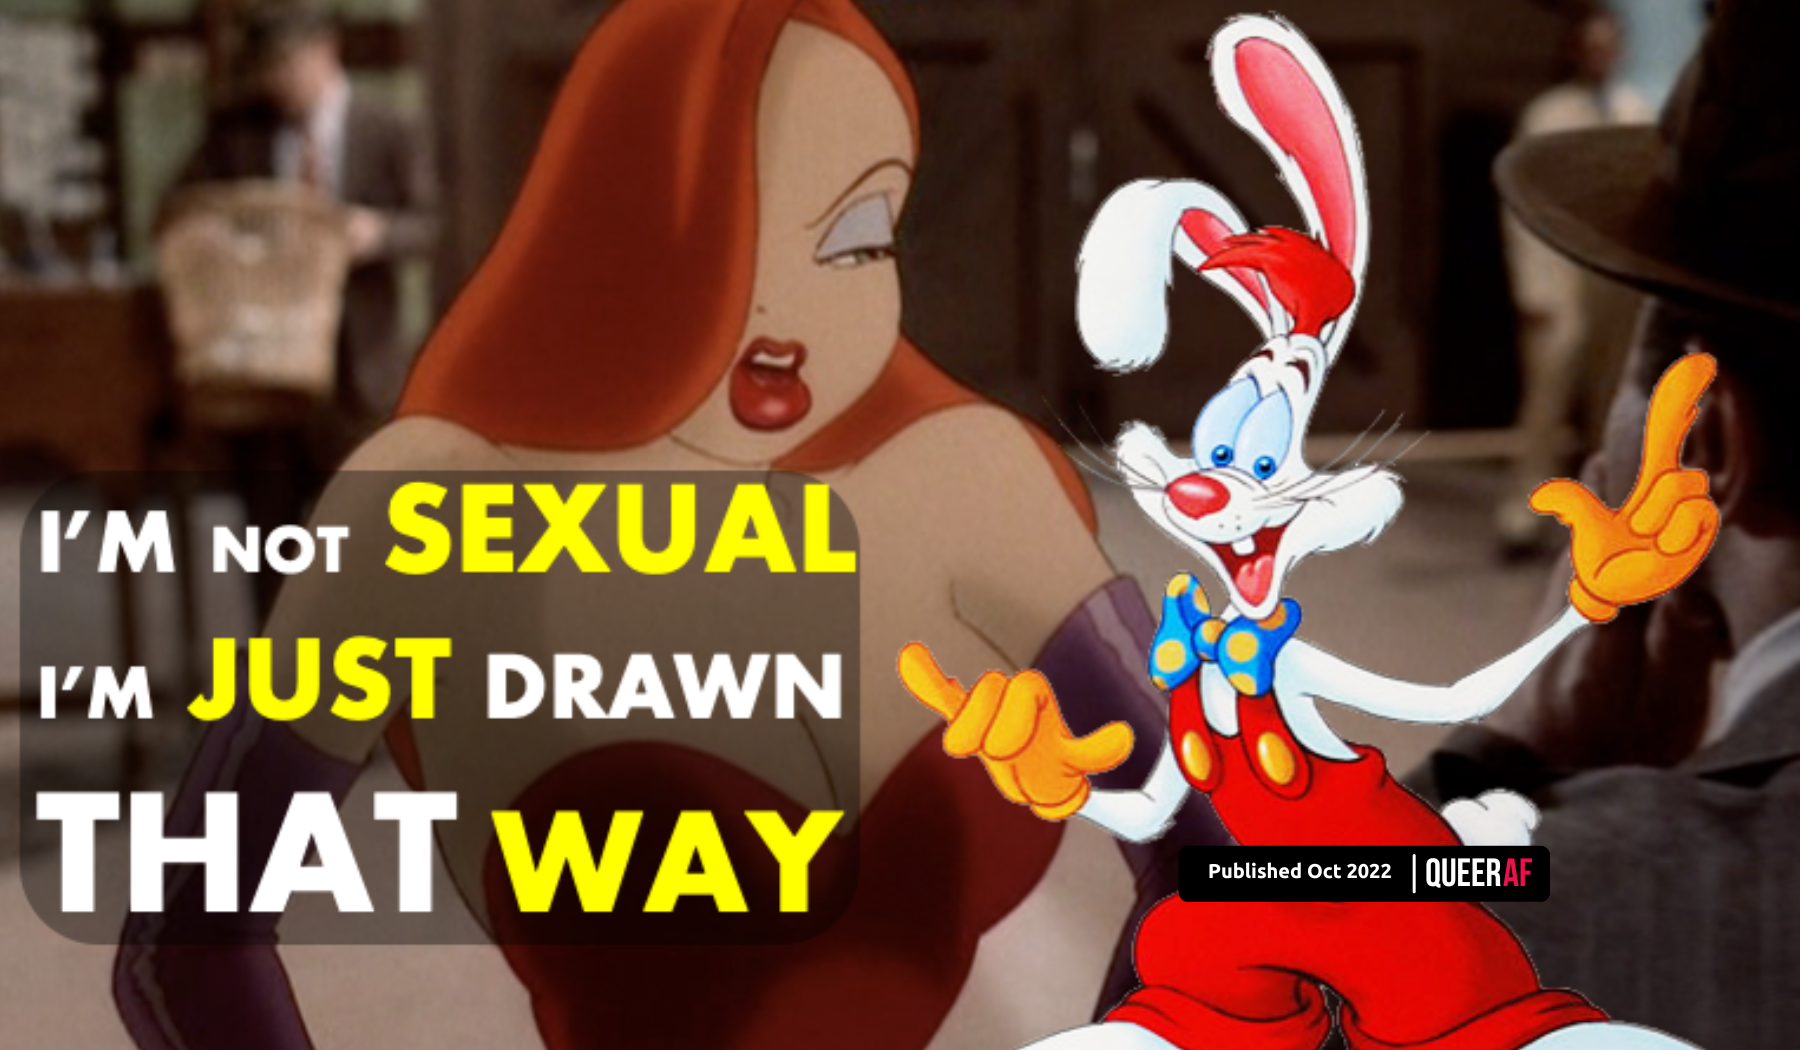 Jessica Rabbit is an asexual icon. Here's why that matters